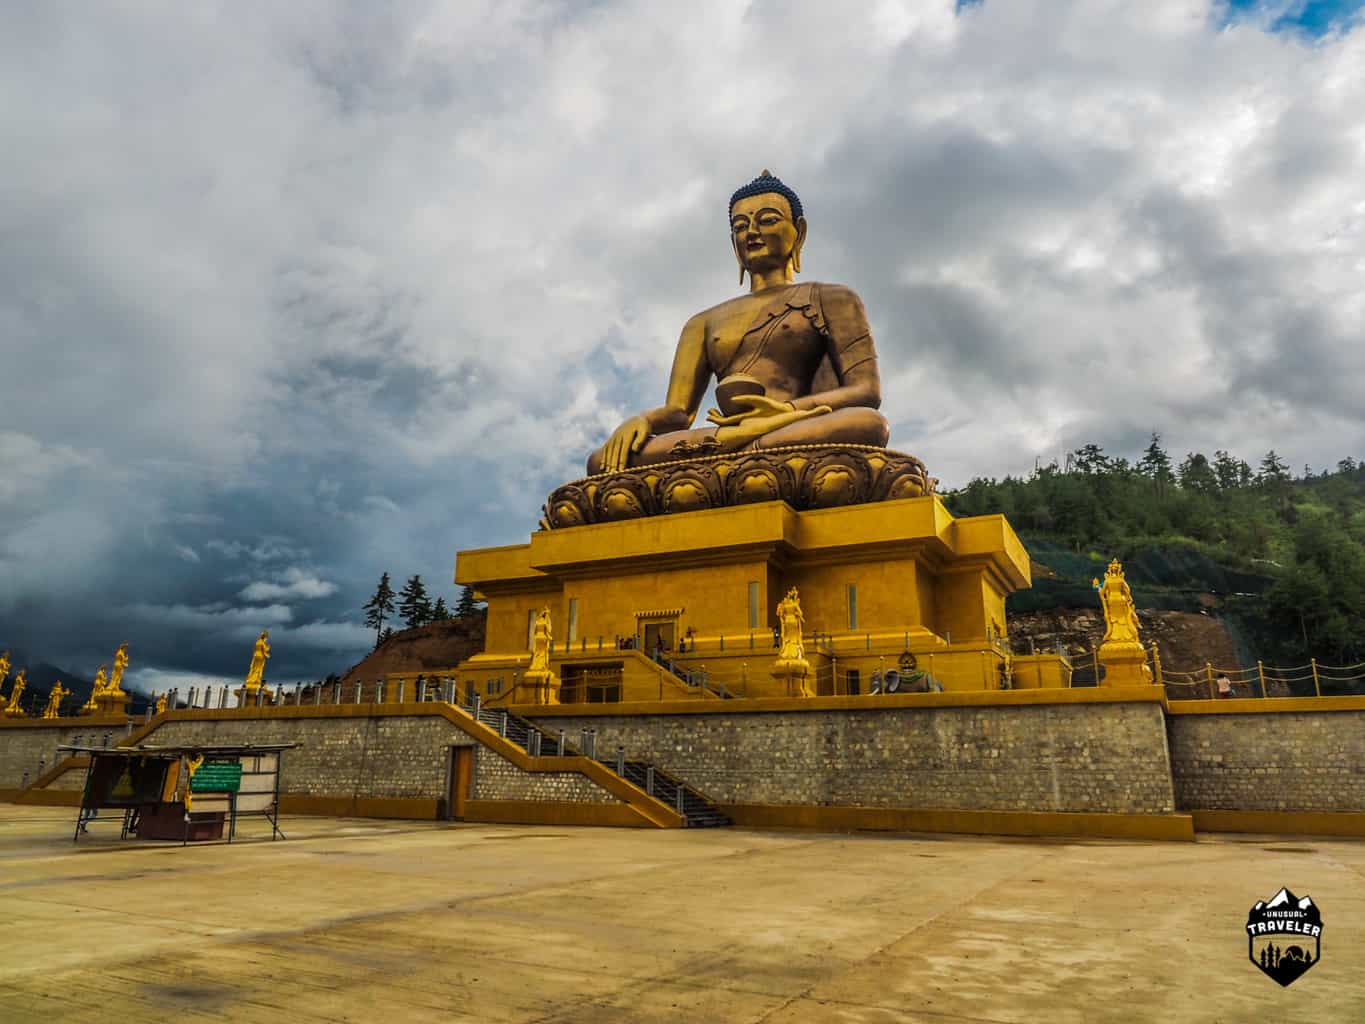 The world's biggest sitting Buddha statue is currently being constructed in Bhutans capital Thimphu. The Buddha statue will be 51,5 high and accommondate 125 000 smaller Buddha's inside.